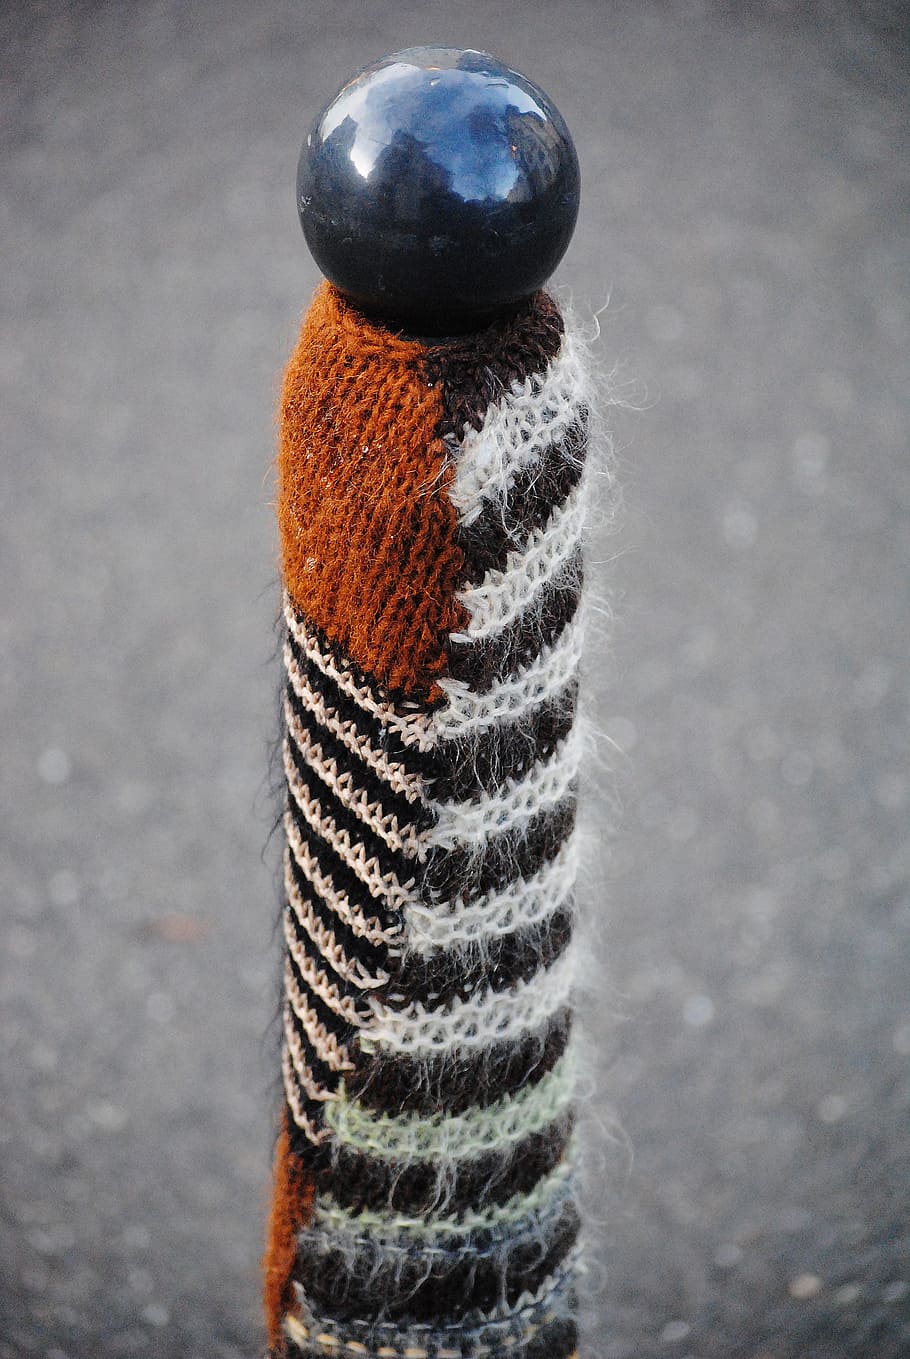 knitted, knit, wool, post, ball, close-up, pattern, textile, focus on foreground, day